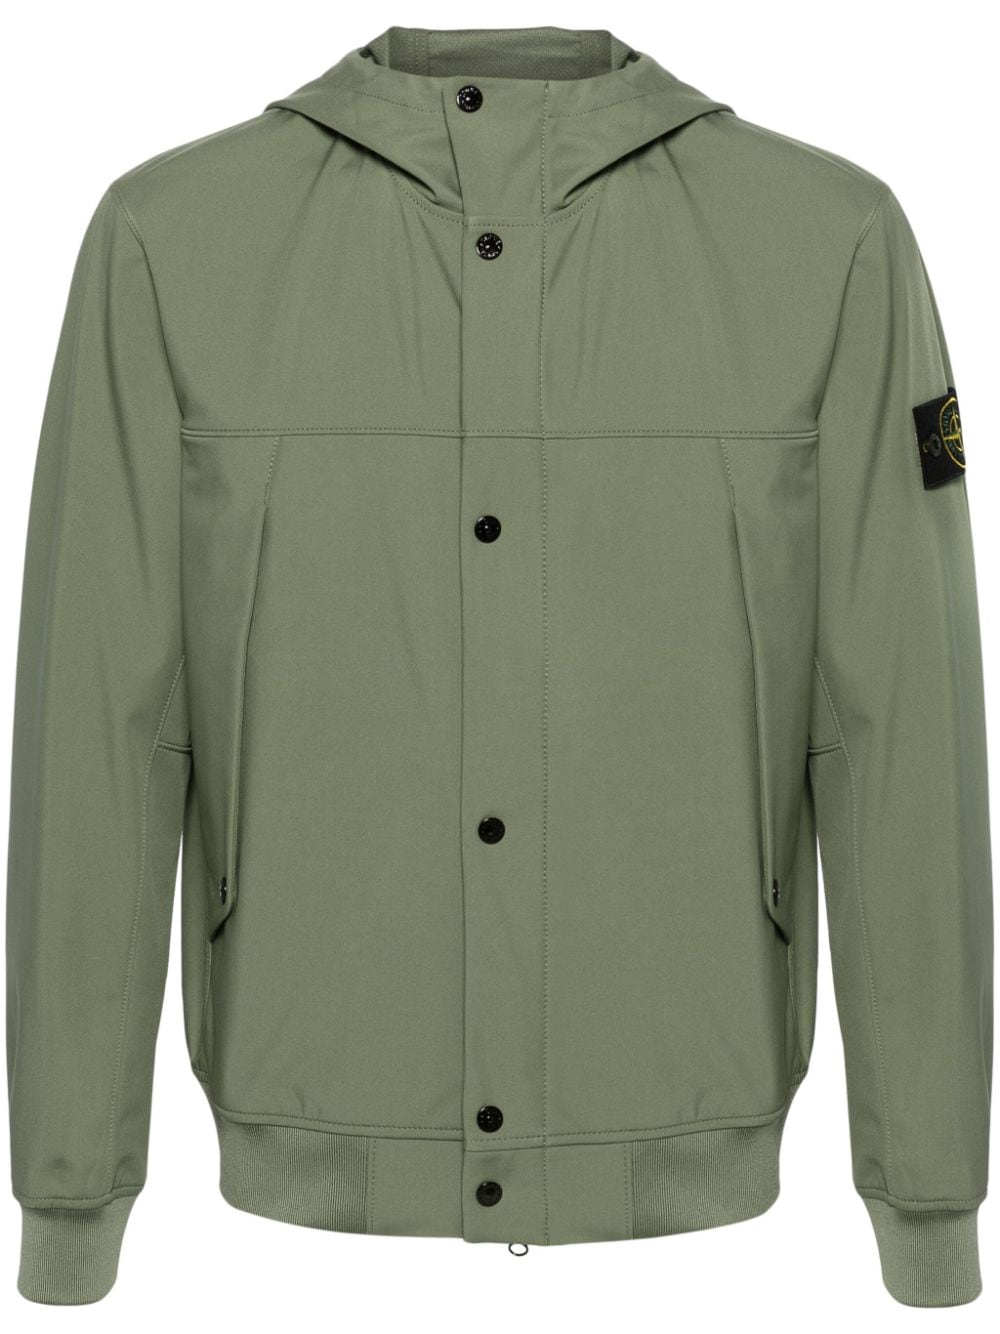 STONE ISLAND Green Techno Fabric Men's Jacket with Removable Logo Patch and Ribbed Edges